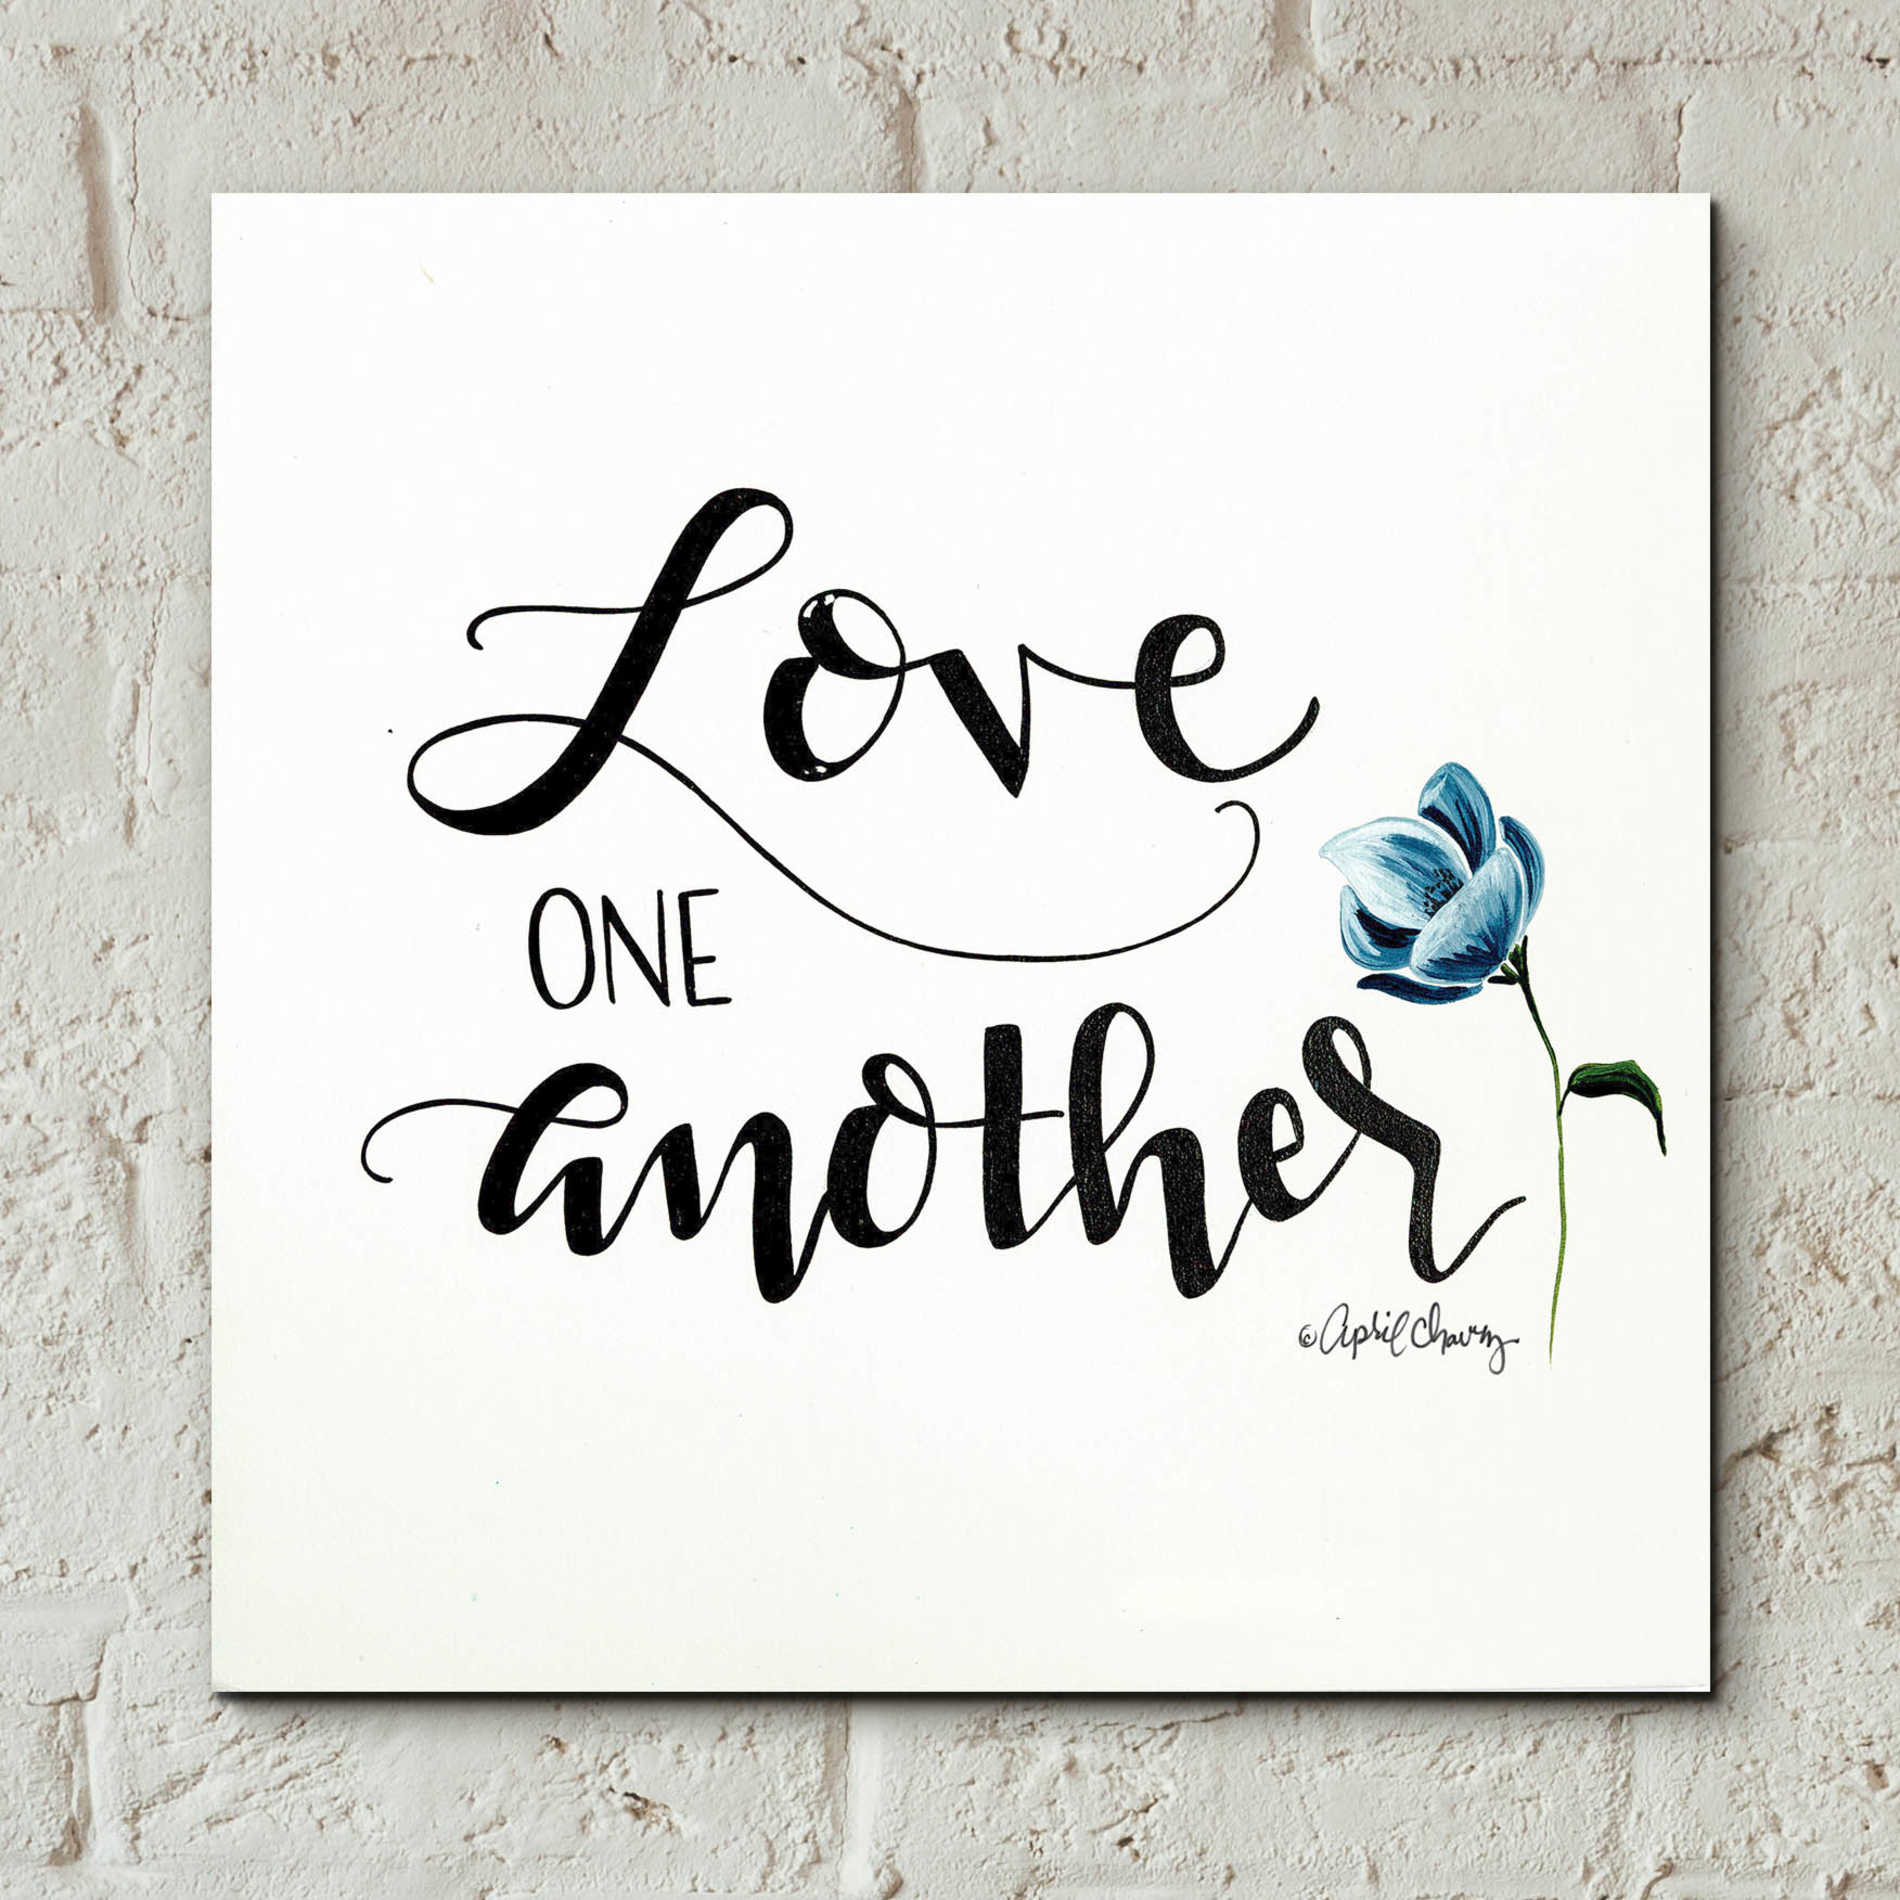 Epic Art 'Love One Another' by April Chavez, Acrylic Glass Wall Art,12x12